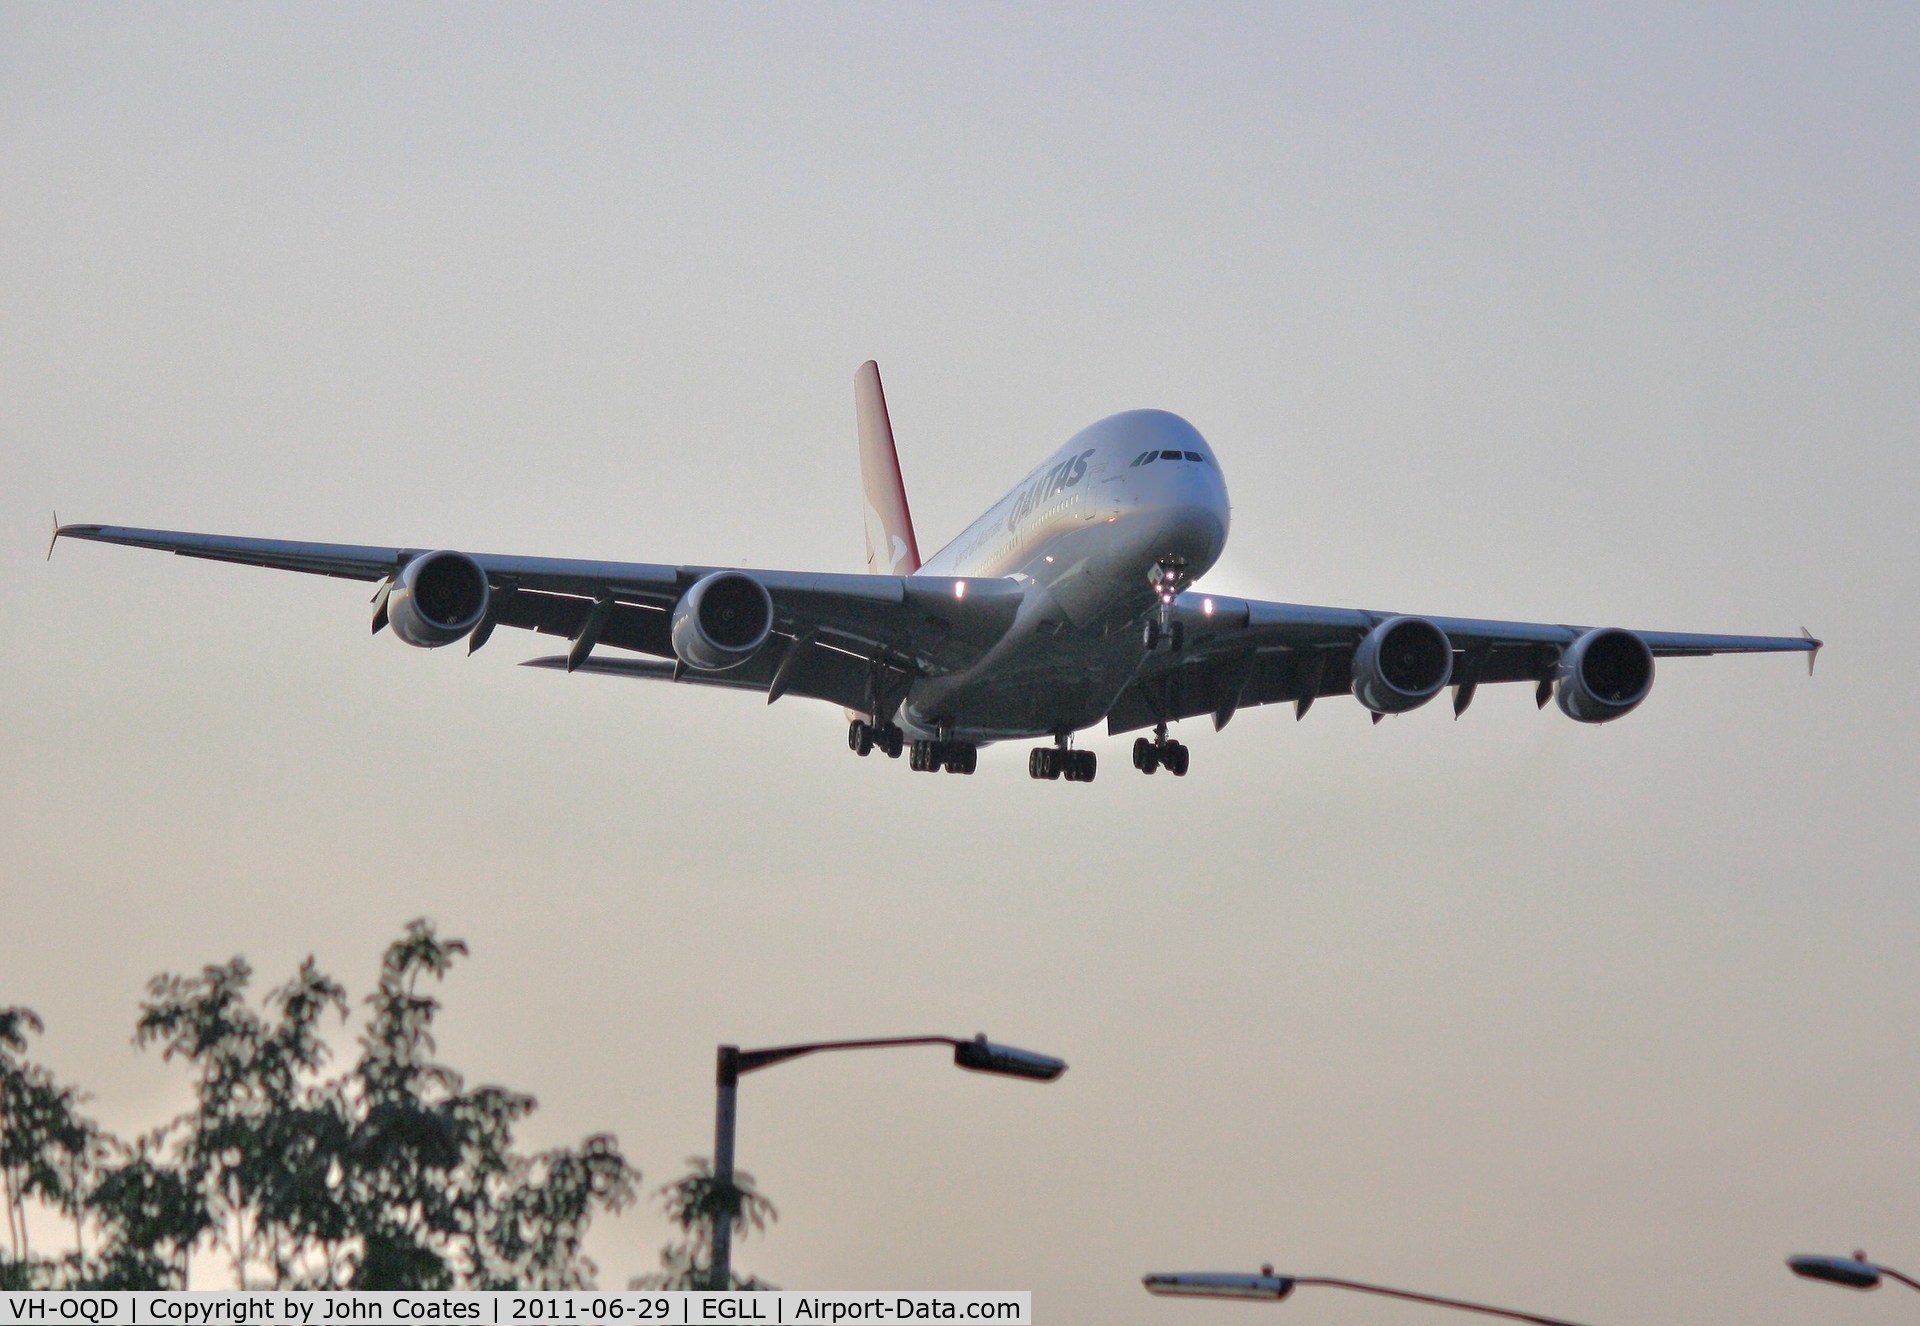 VH-OQD, 2008 Airbus A380-842 C/N 026, Early morning approach to 27L